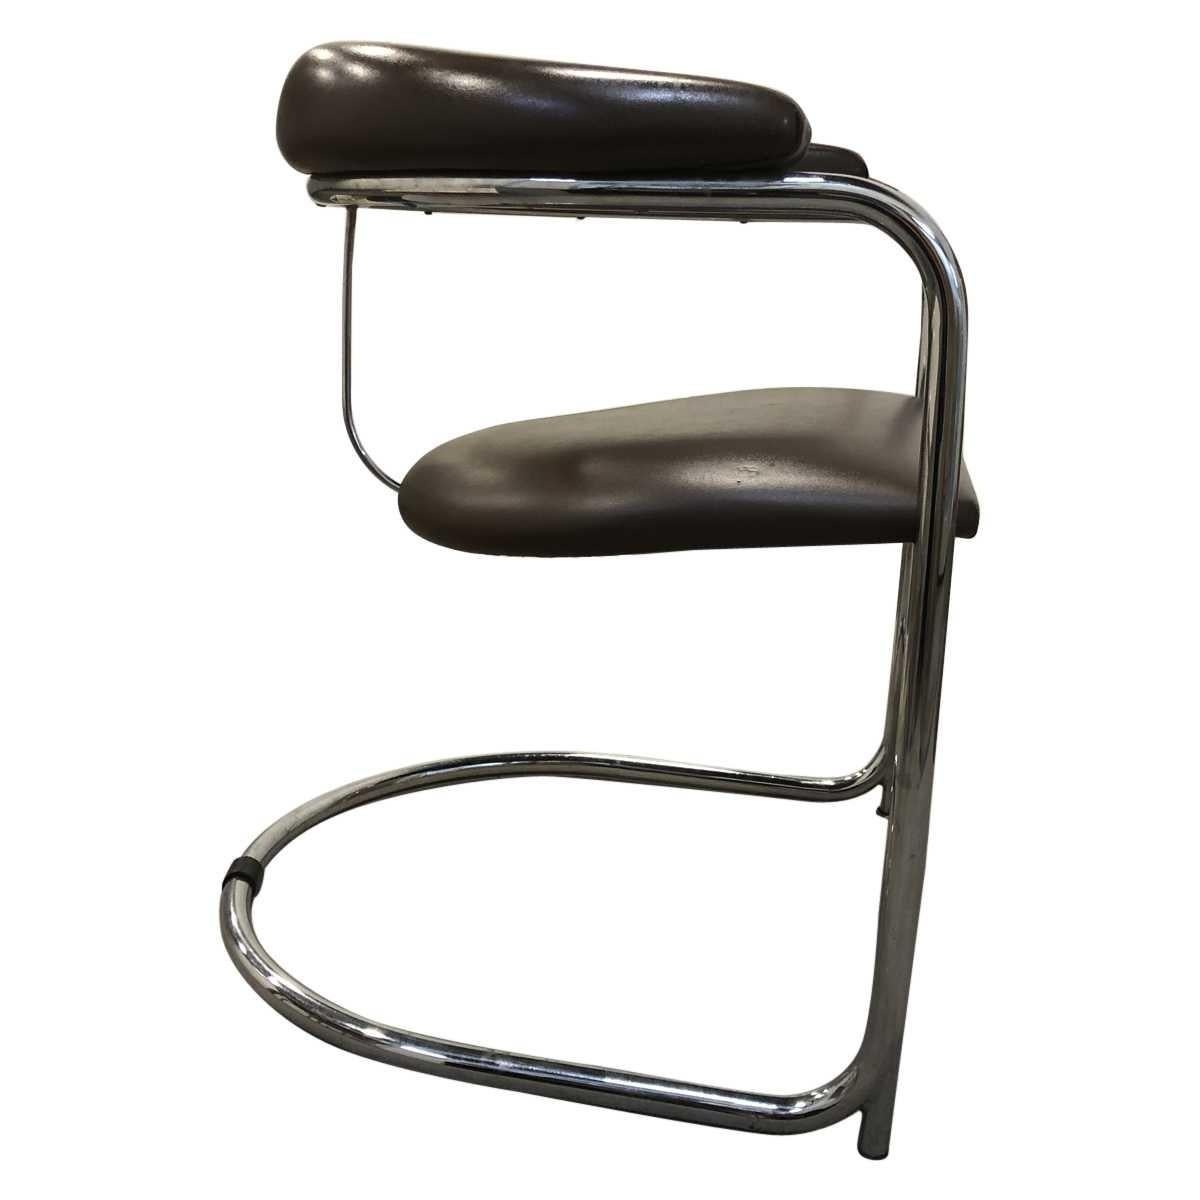 Sold as a set of 2. Later edition model SS33 cantilever armchairs designed by Hungarian designer Anton Lorenz for Thonet in 1929. Classic Bauhaus design with padded backrest and seat upholstered in chocolate brown vinyl and chrome-plated tubular